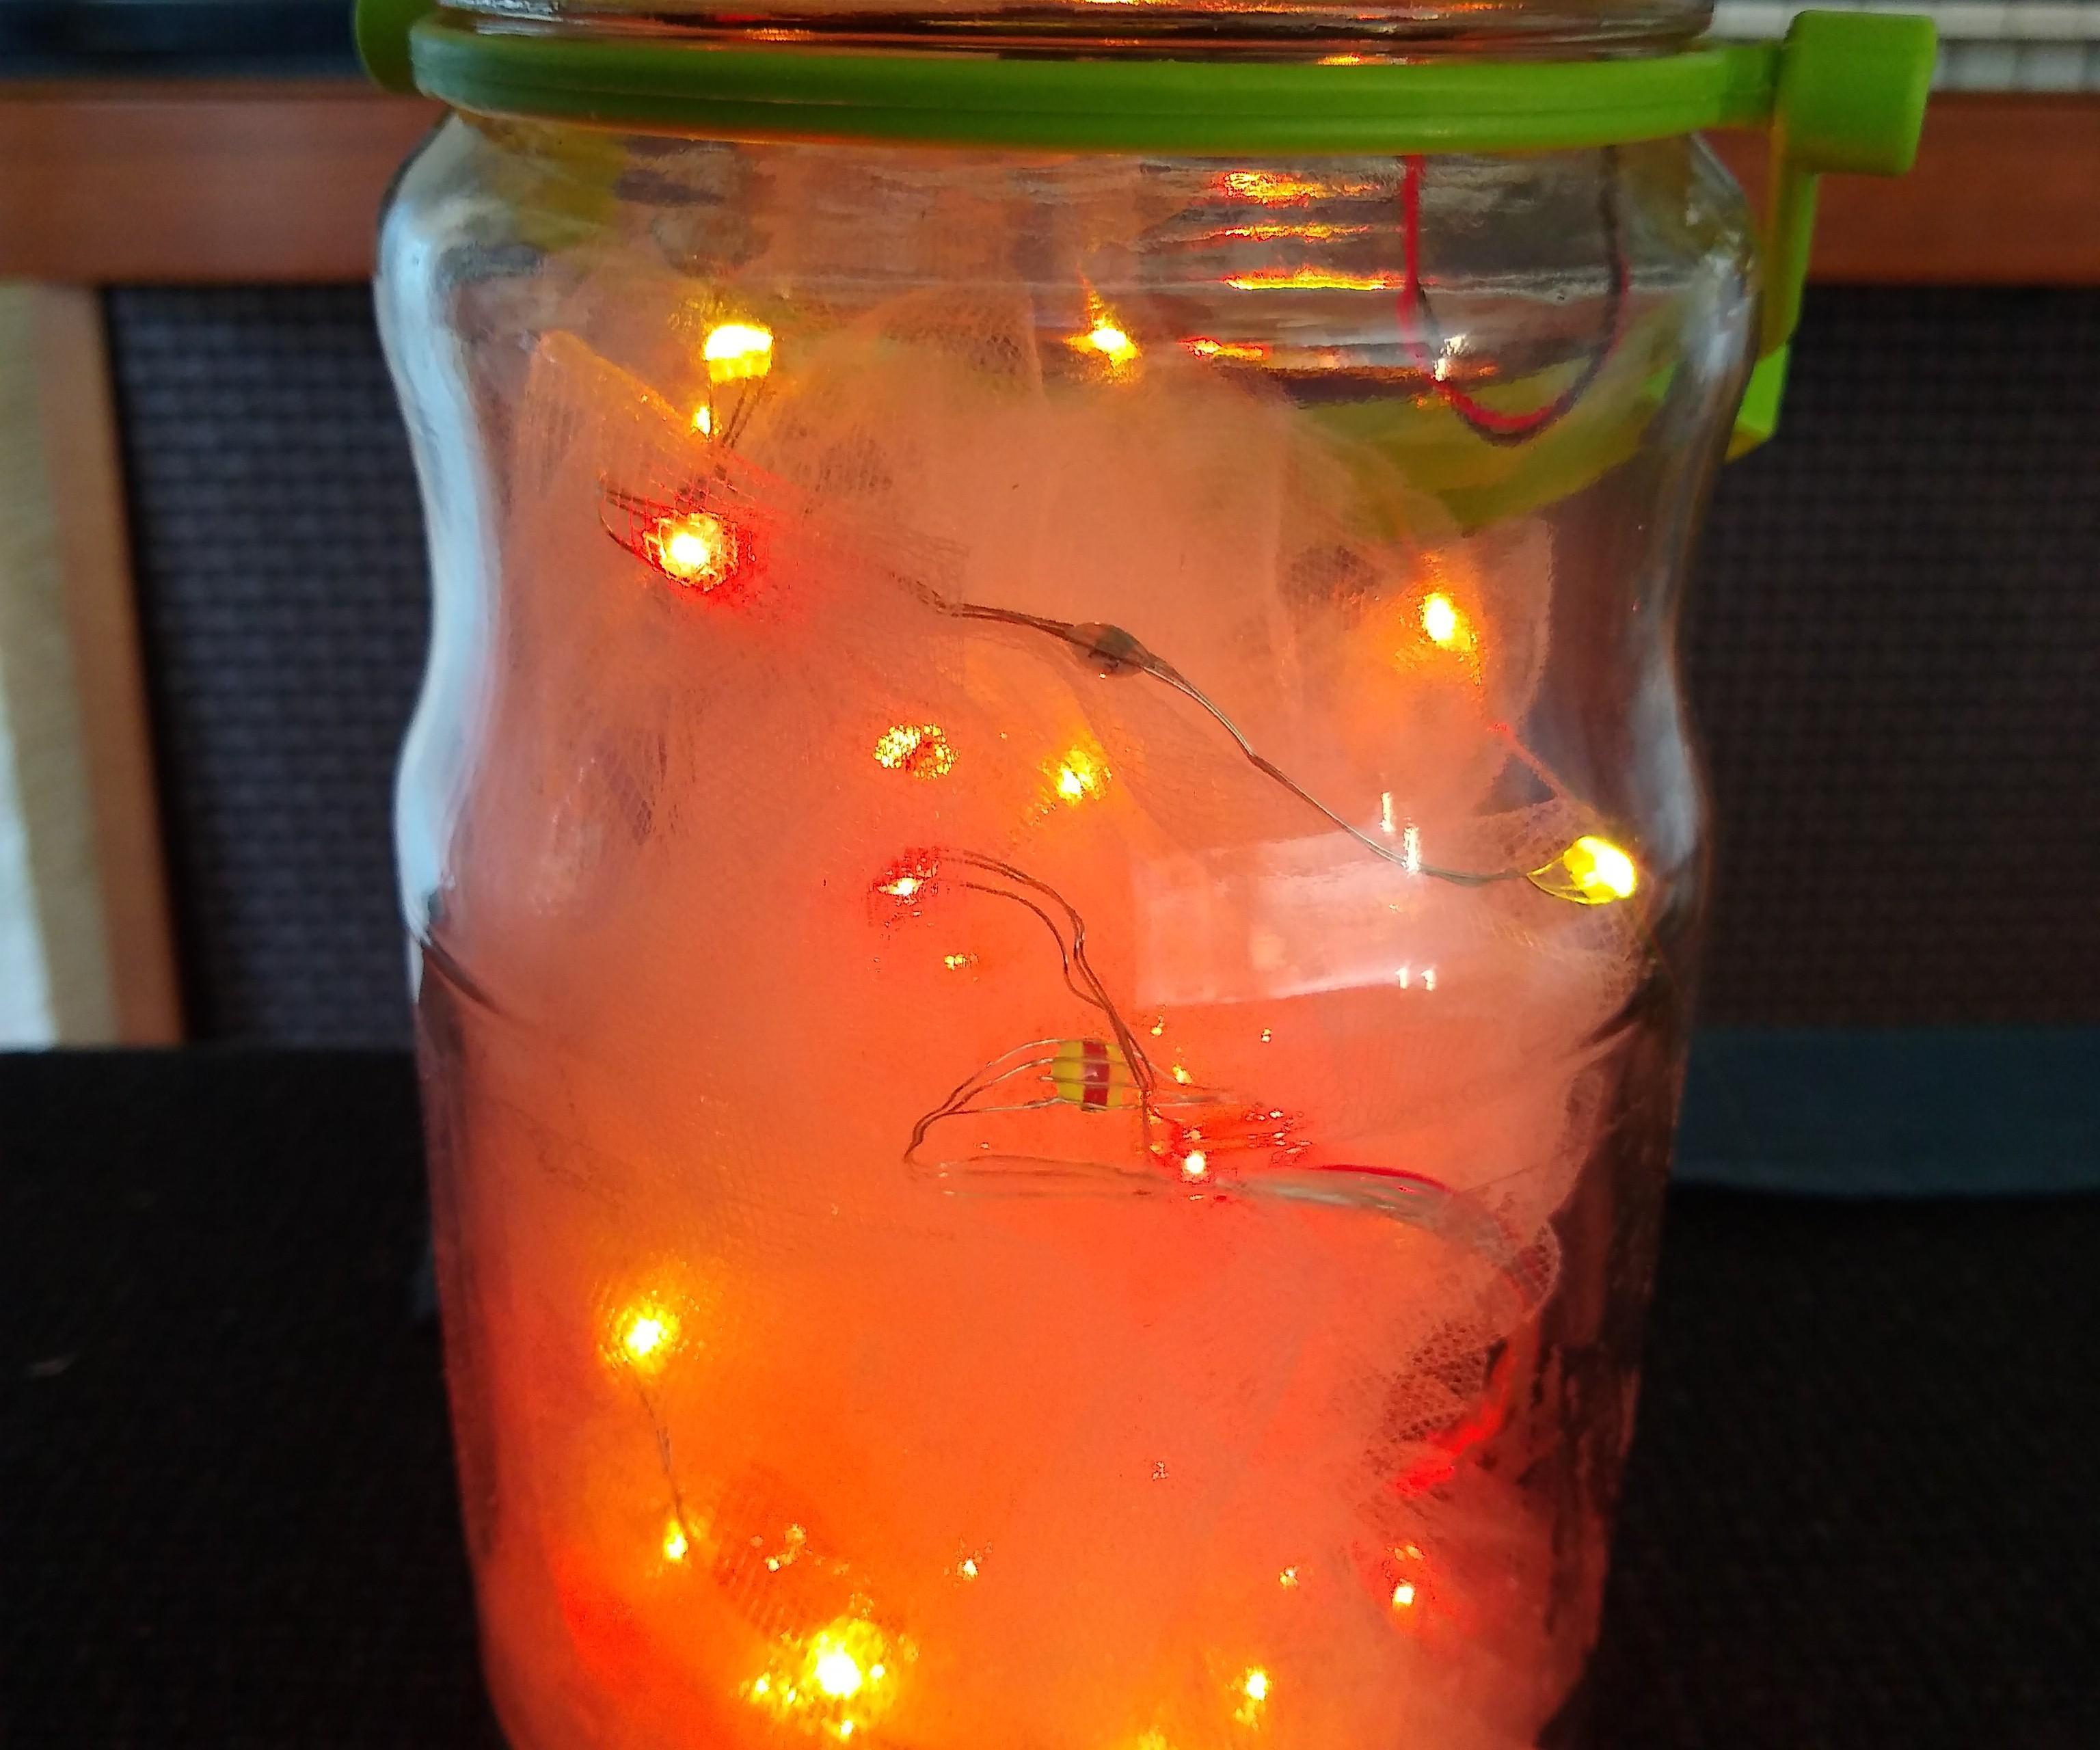 Firefly Pickle Jar With Microbit and Neopixels